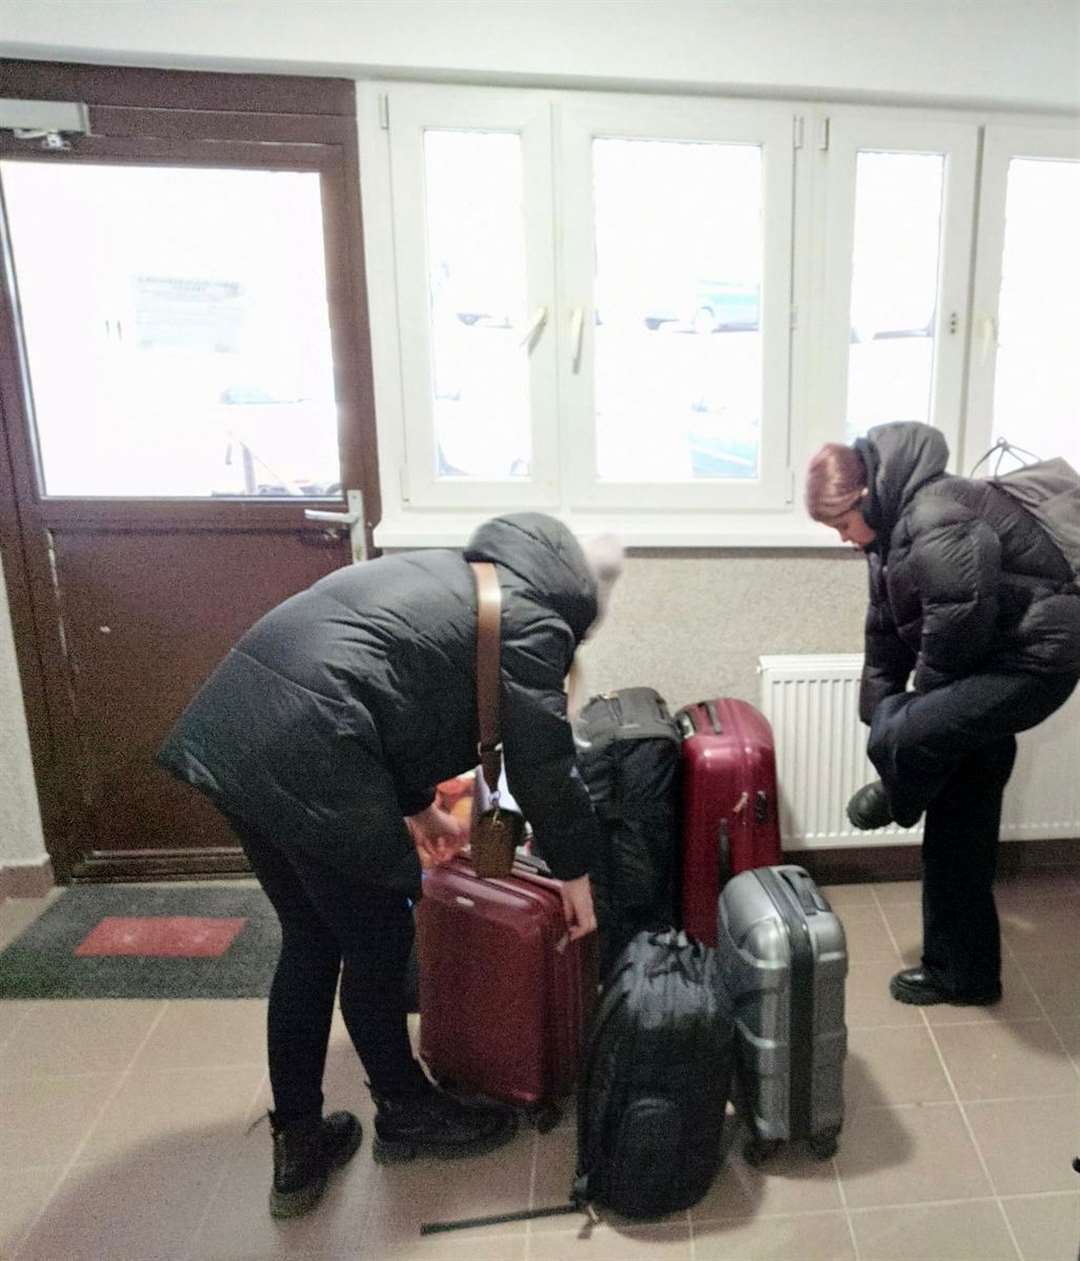 Hanna Hordynska in Ukraine with her sister as they prepared to flee the country (Hanna Hordynska/PA)